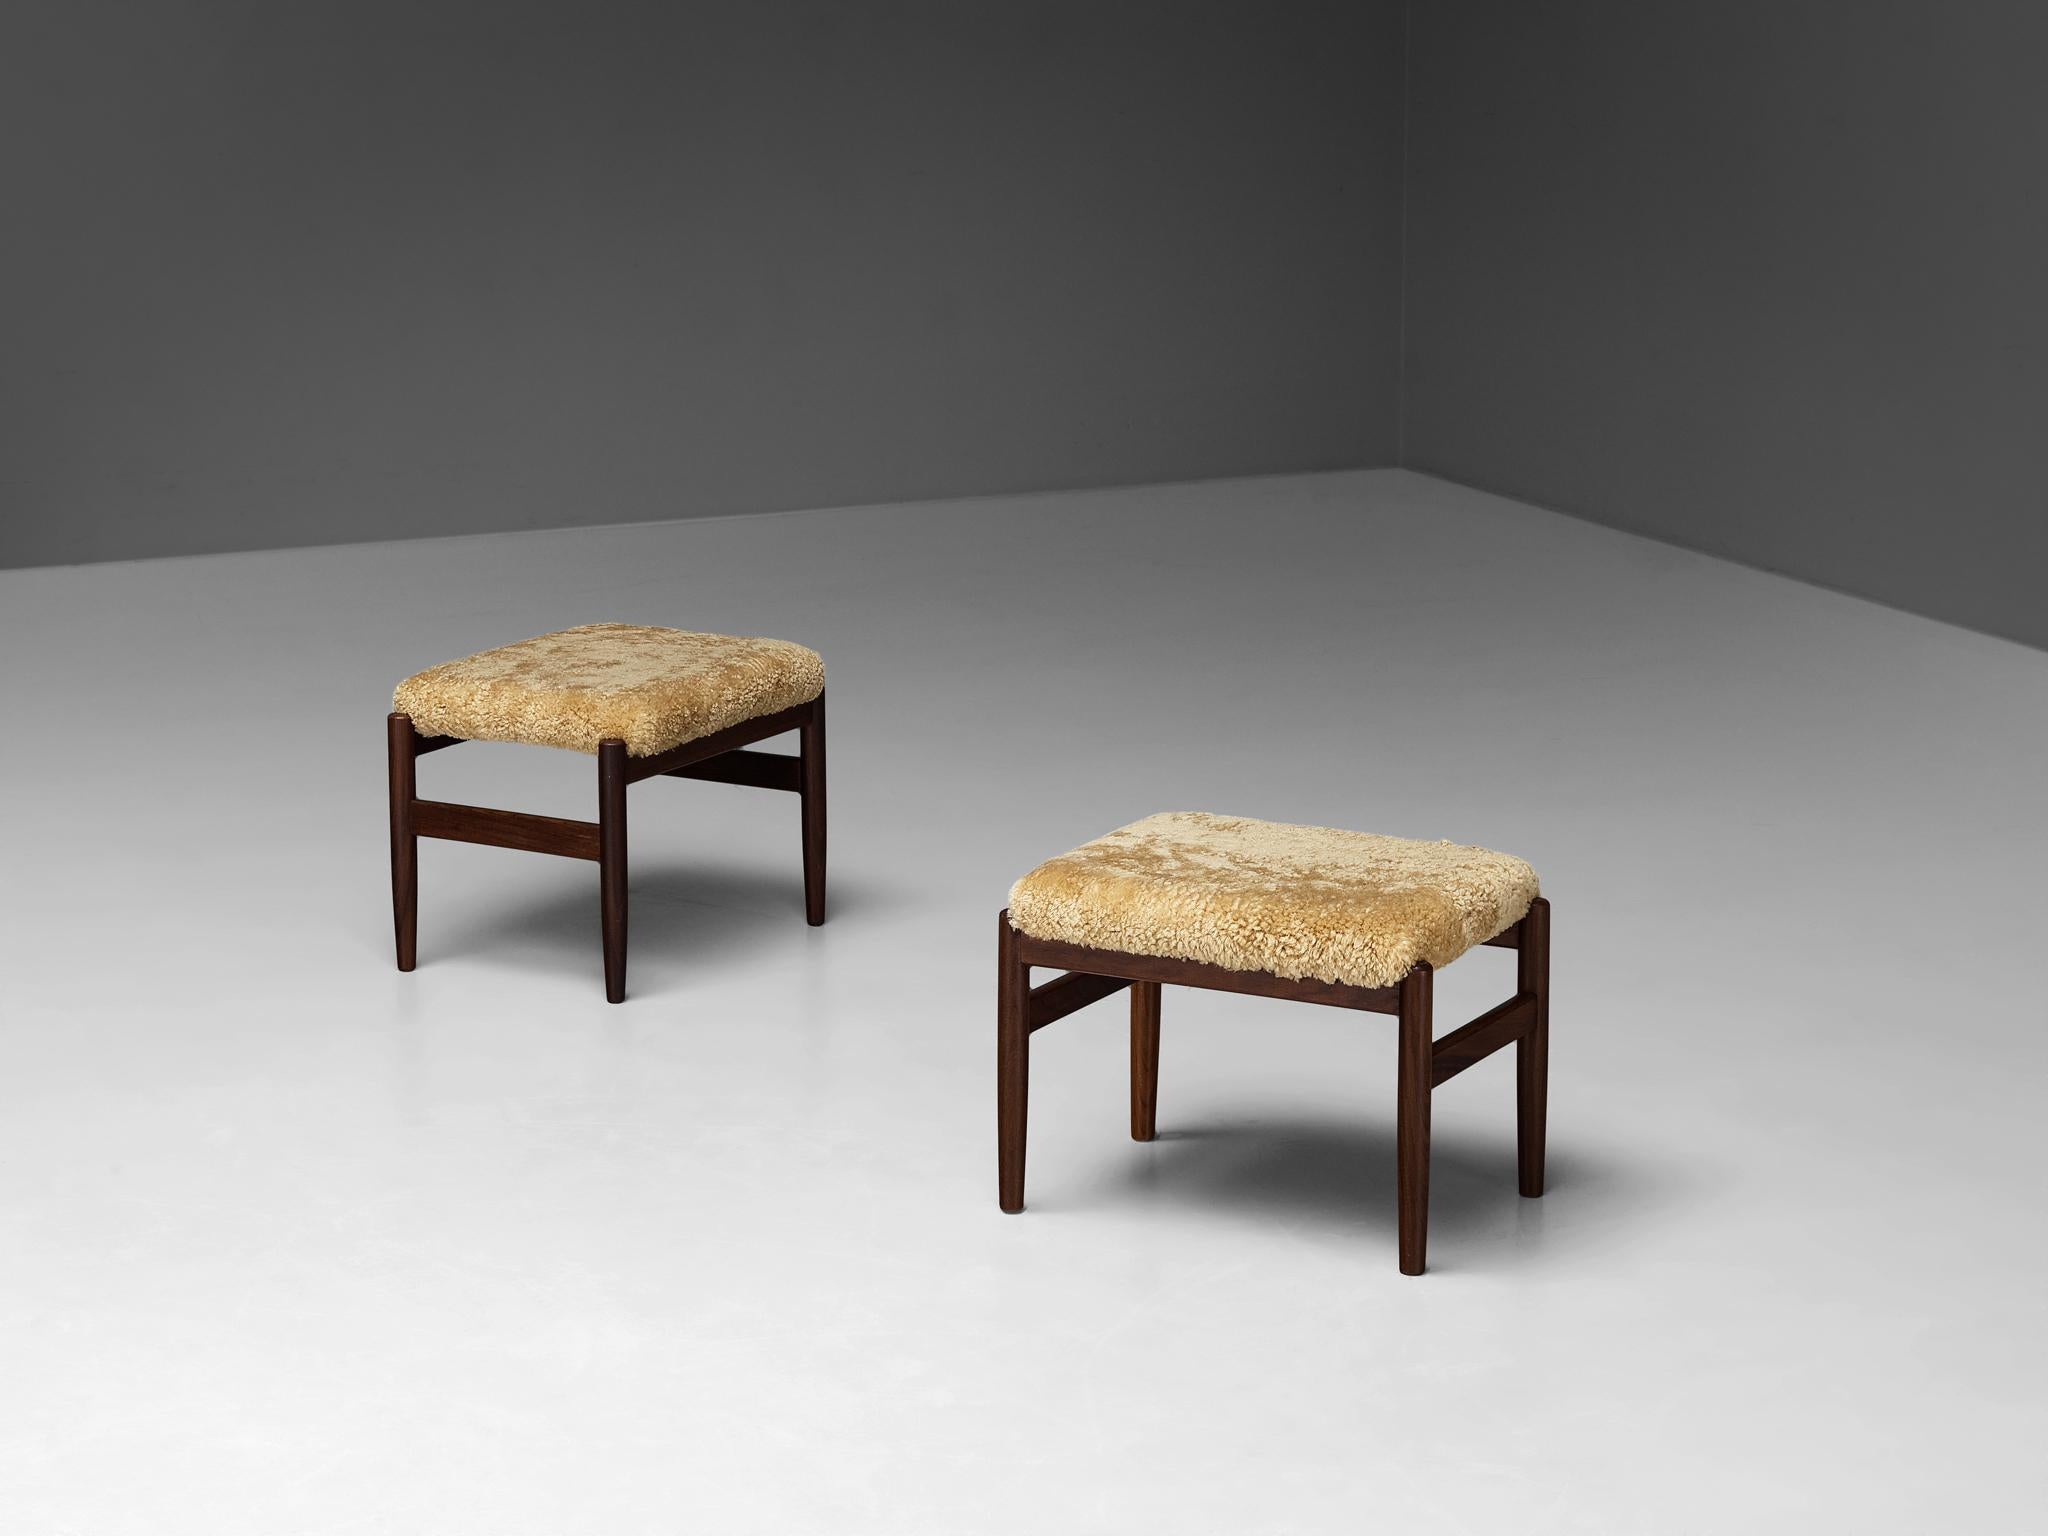 Danish Scandinavian Stools in Teak and Shearling Upholstery  For Sale